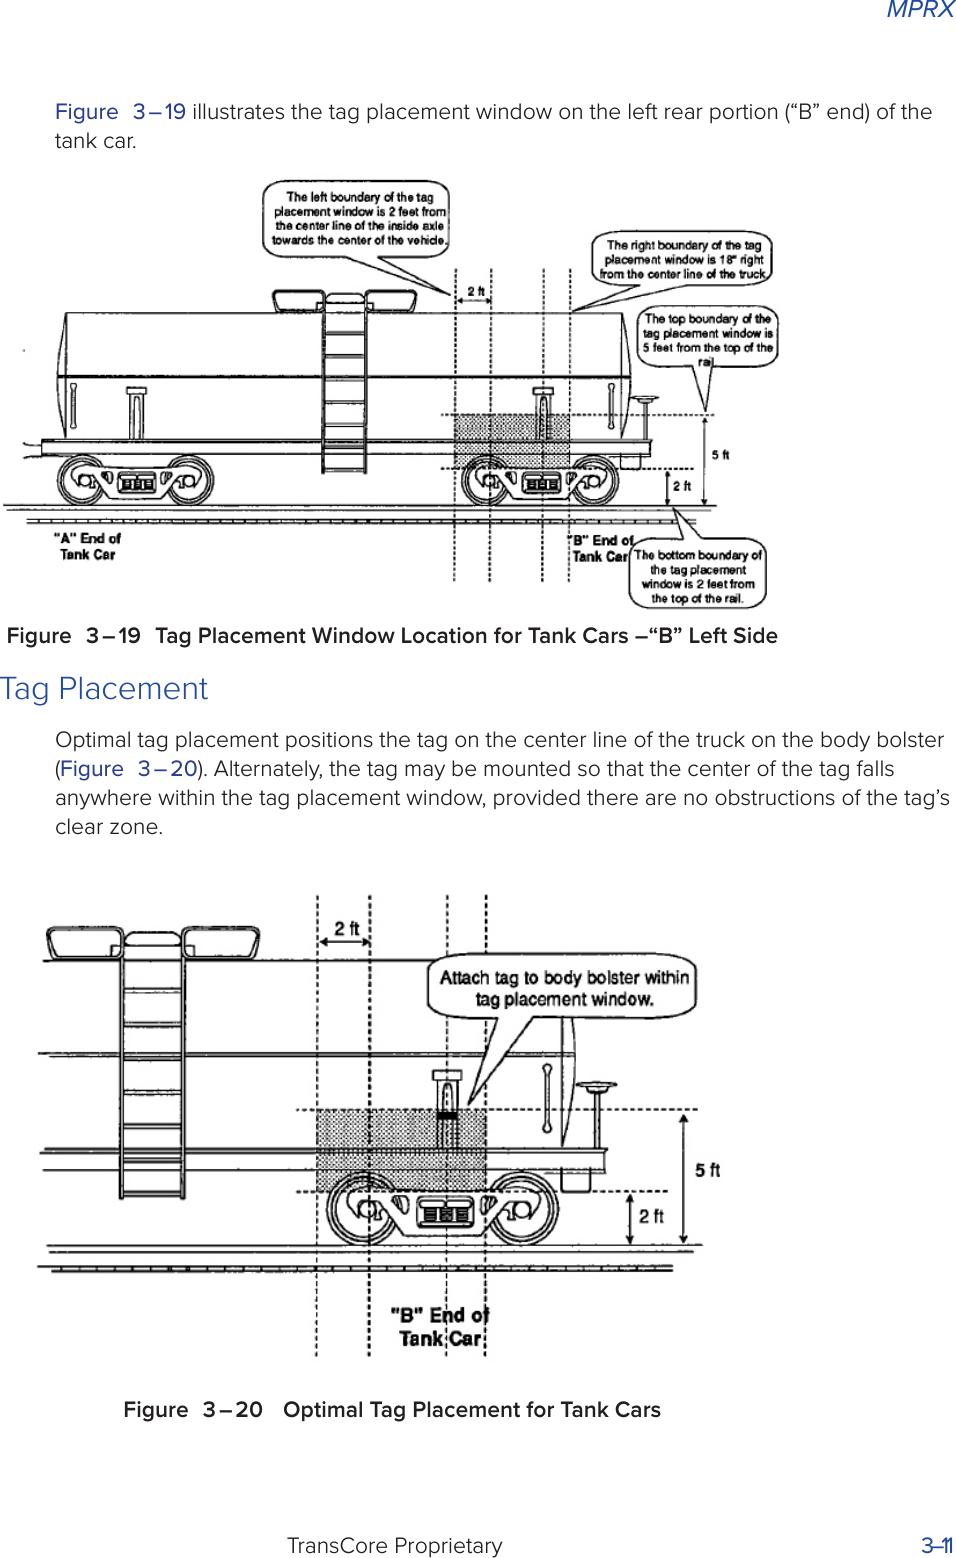 MPRXTransCore Proprietary 3–11Figure 3 – 19 illustrates the tag placement window on the left rear portion (“B” end) of the tank car.Figure 3 – 19 Tag Placement Window Location for Tank Cars –“B” Left SideTag PlacementOptimal tag placement positions the tag on the center line of the truck on the body bolster (Figure 3 – 20). Alternately, the tag may be mounted so that the center of the tag falls anywhere within the tag placement window, provided there are no obstructions of the tag’s clear zone.Figure 3 – 20  Optimal Tag Placement for Tank Cars